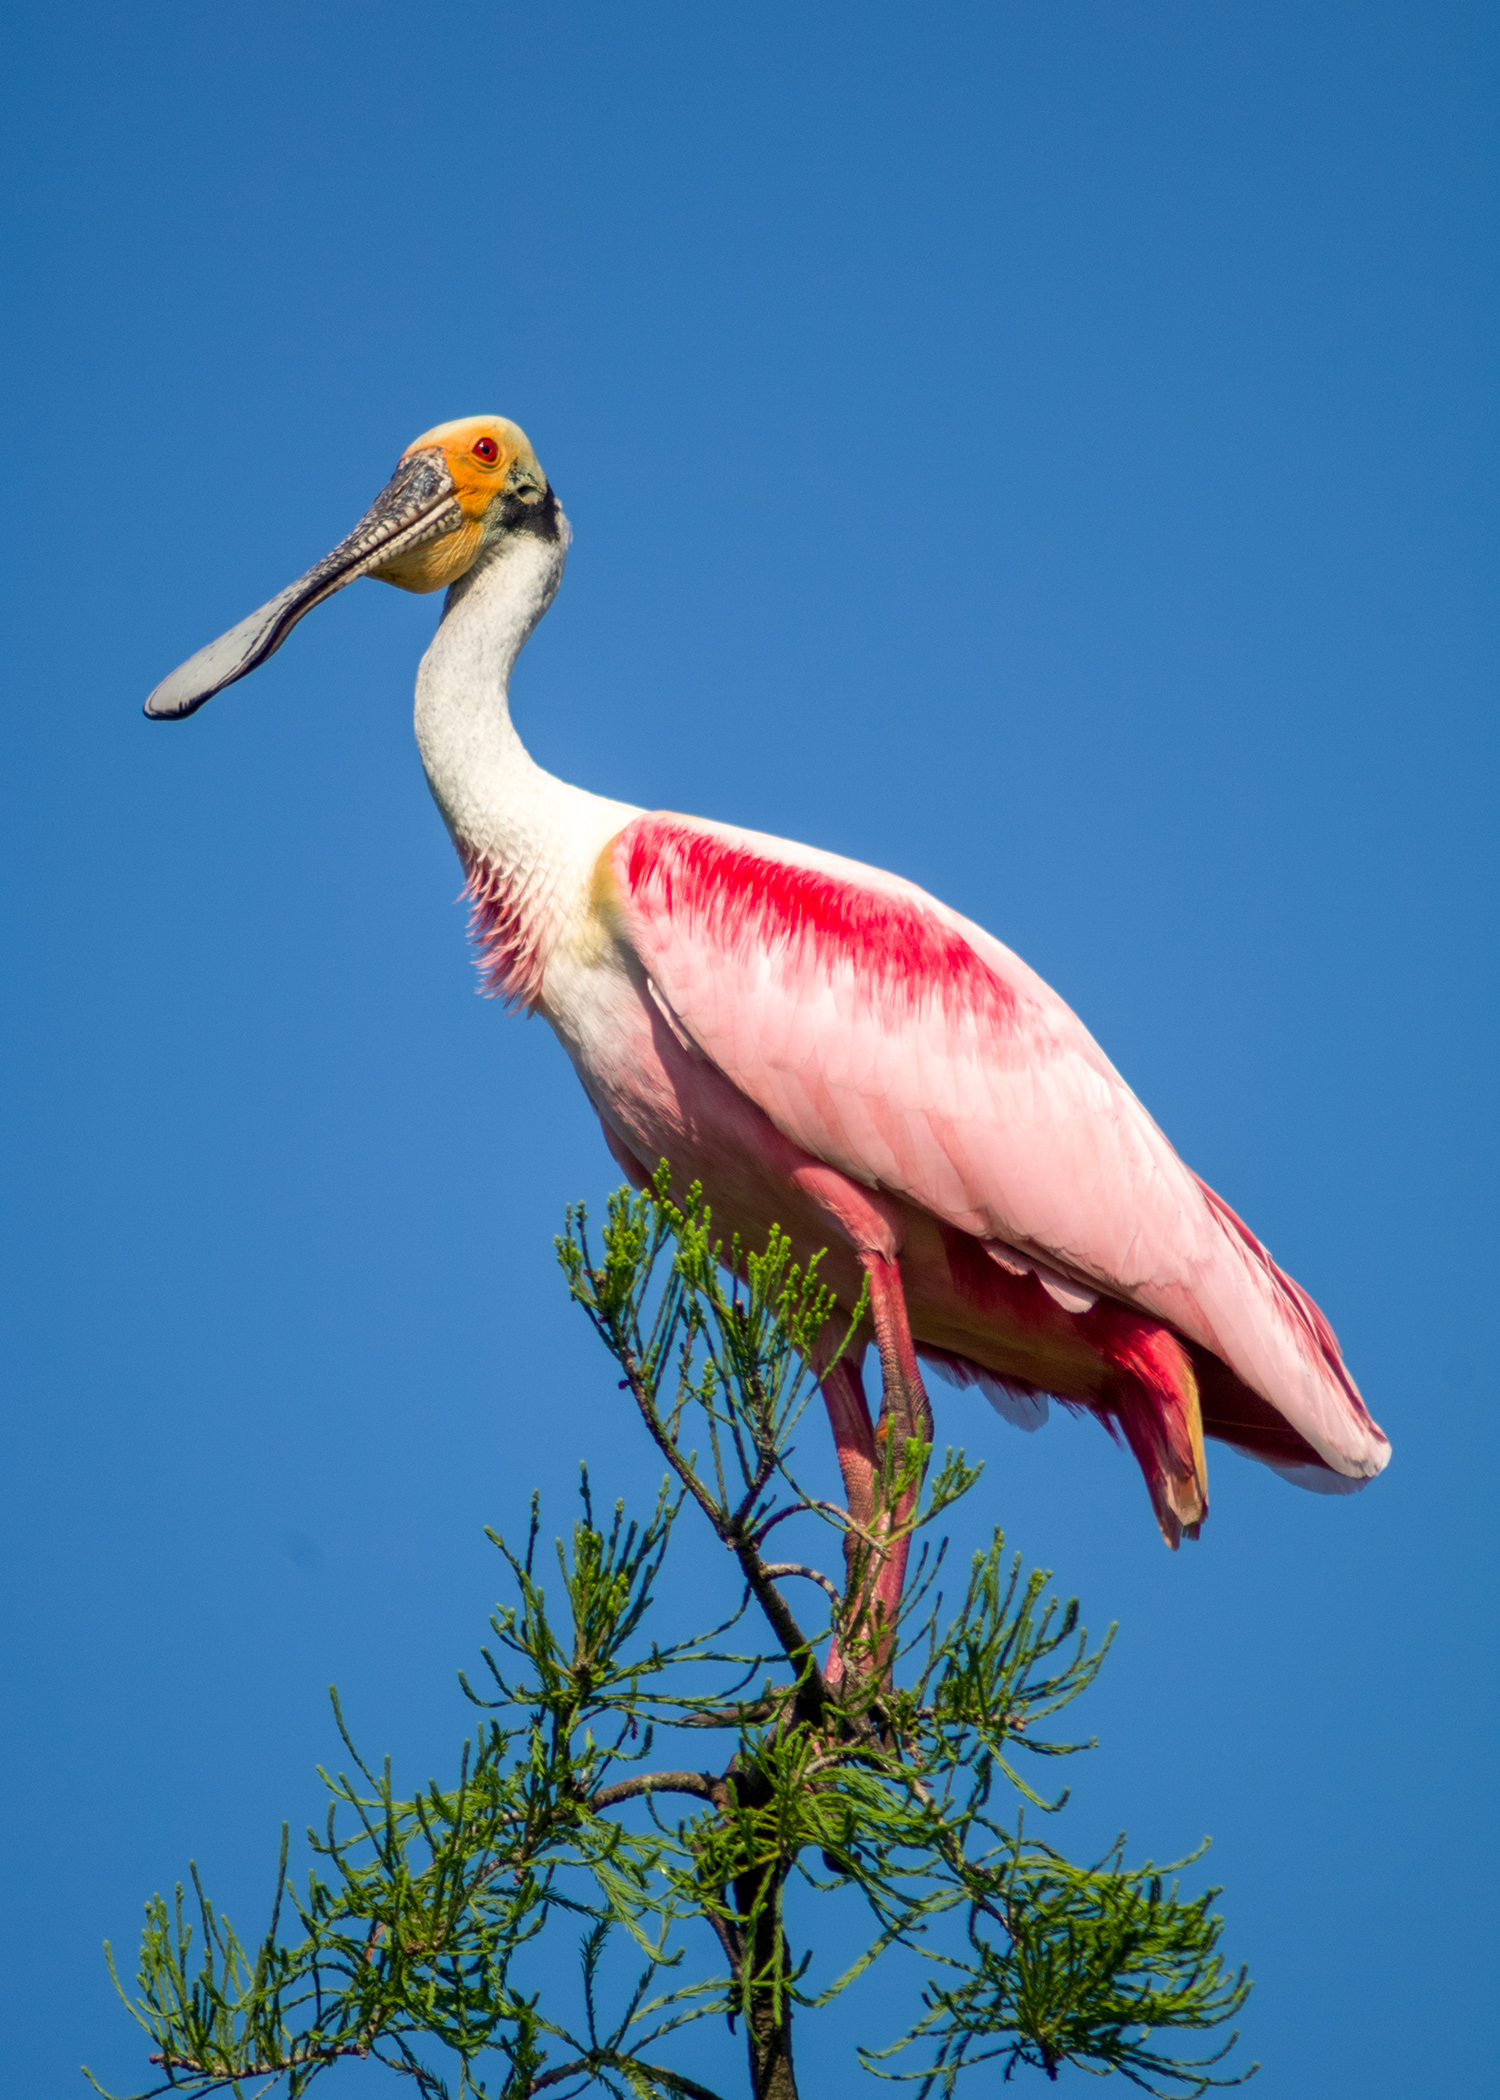 Roseate spoonbills burst with colors whether they are flying or roosting in a tree. (Photo by Bill Stripling).